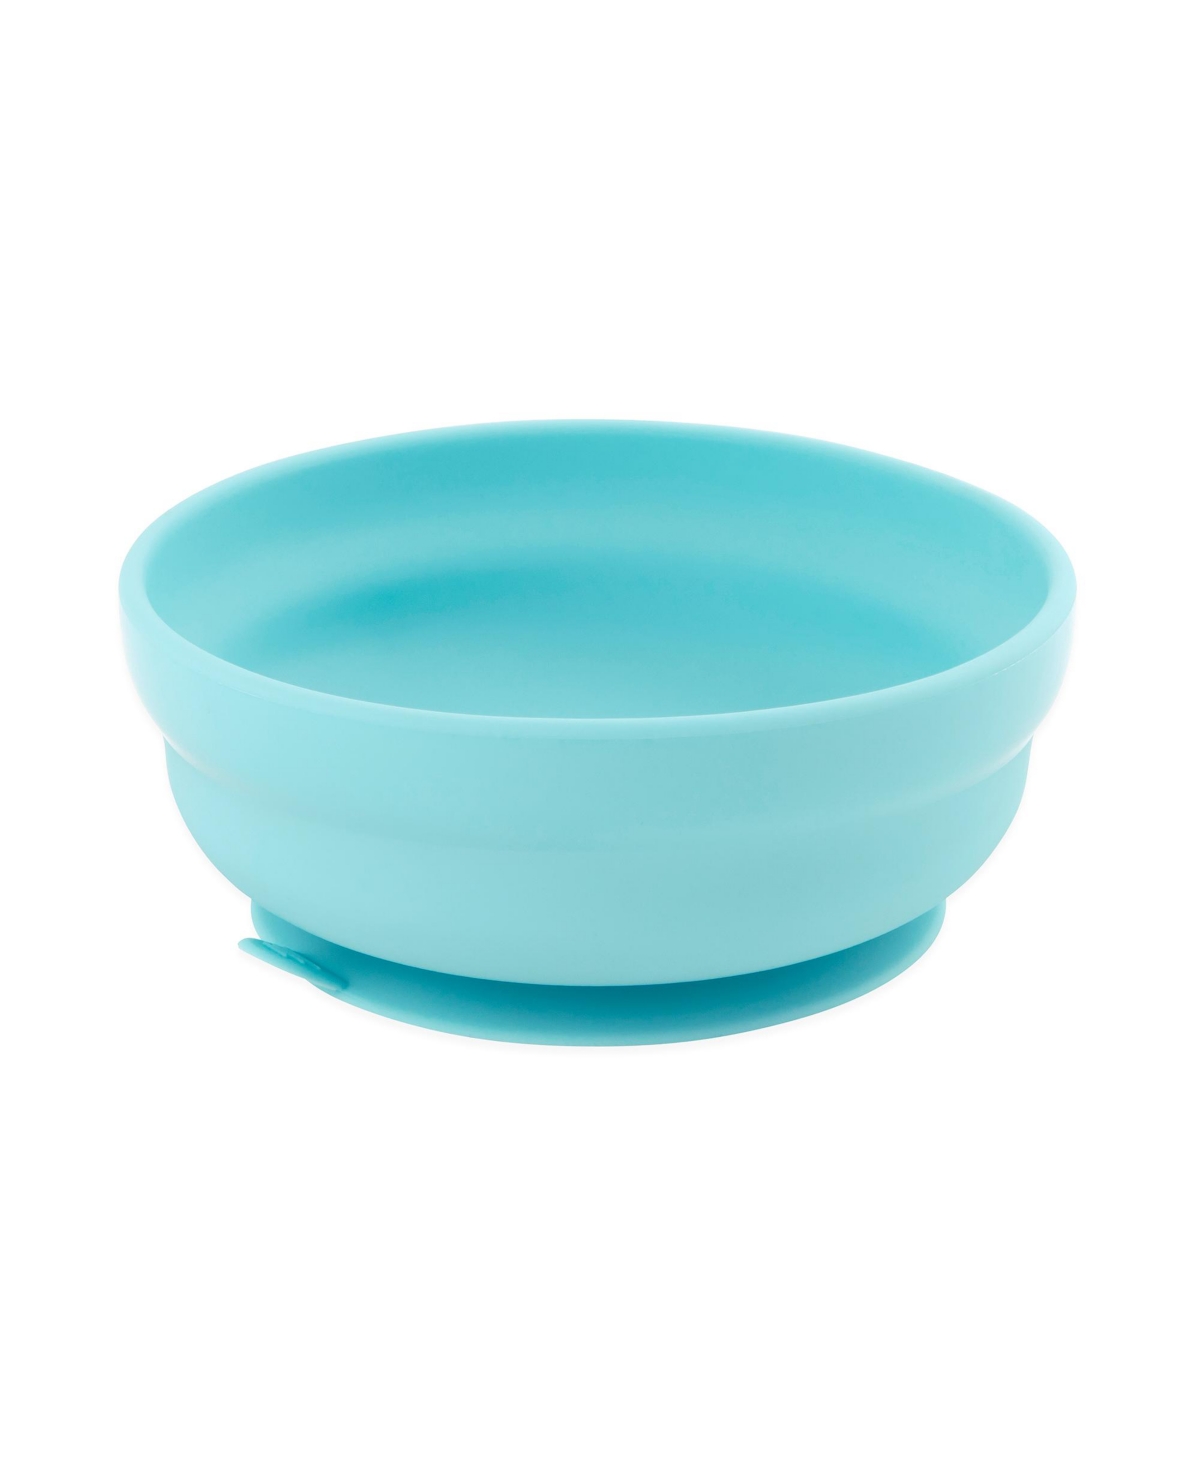 Bumkins Baby Boys And Girls Silicone Grip Bowl In Blue